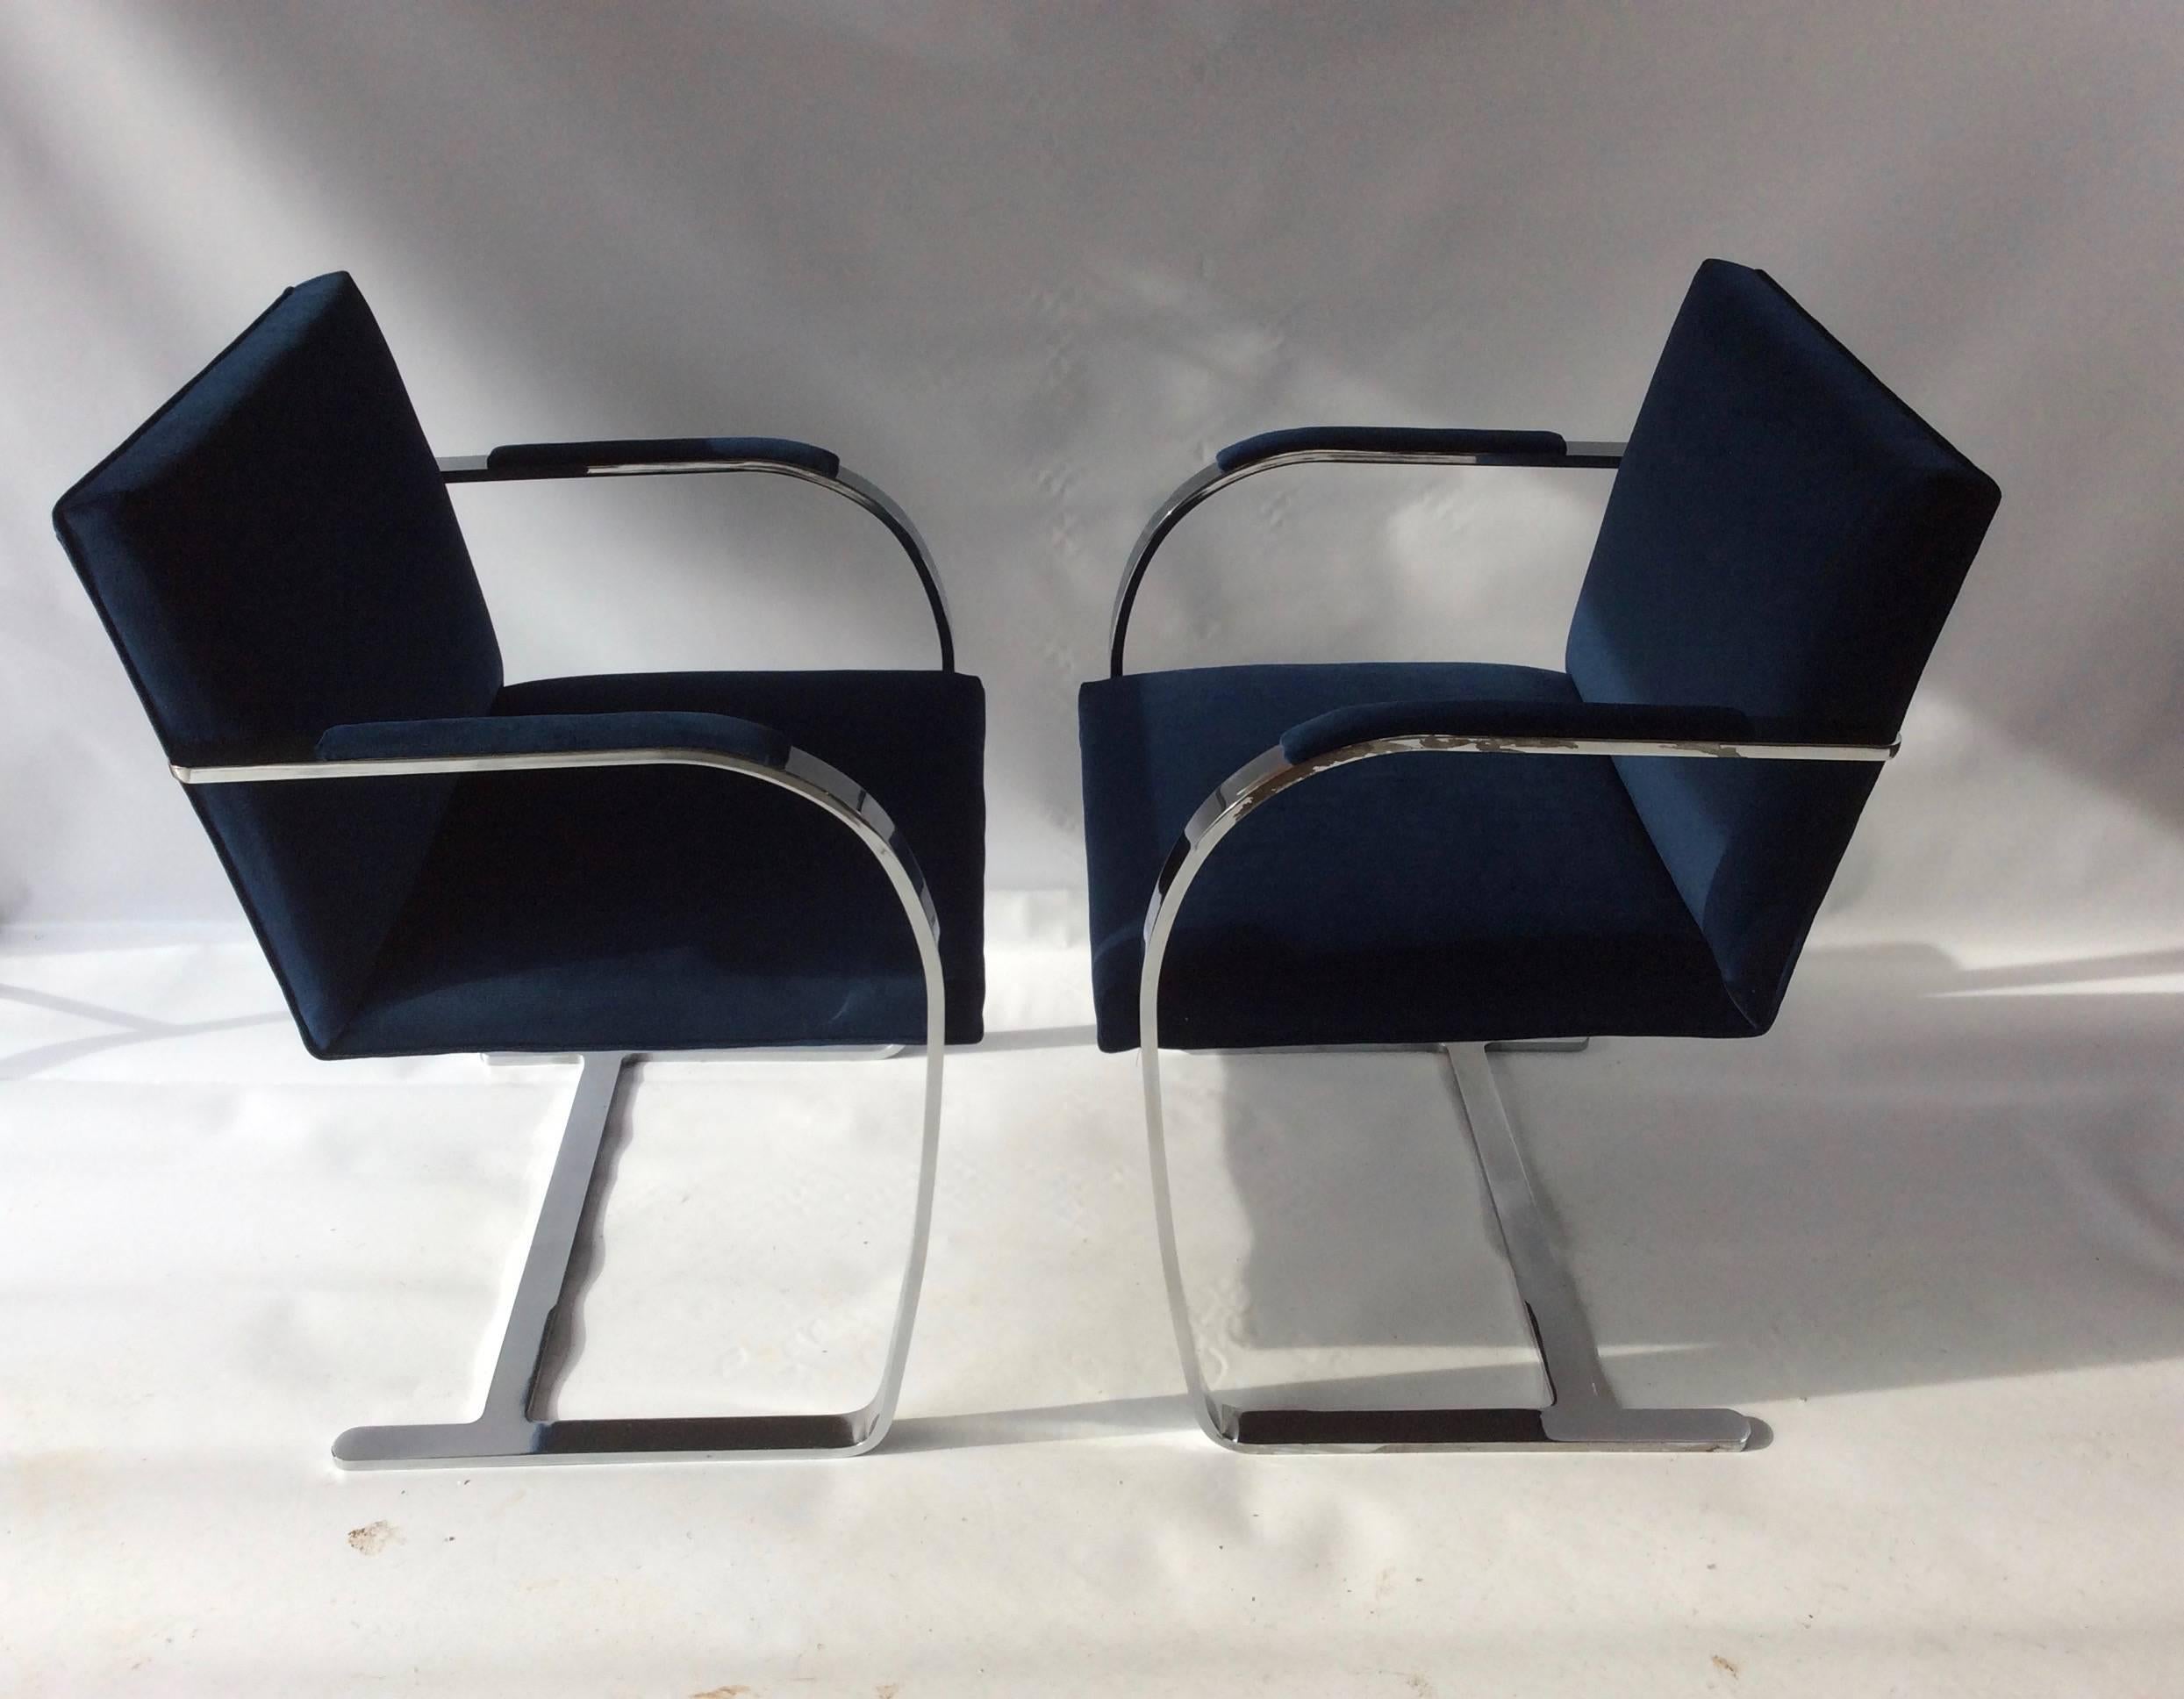 A striking pair unmarked BRNO cantilevered chairs, attributed to Mies Van Der Rohe. Chrome finish on clean lined, flat bar frames. Newly re-upholstered in a gorgeous prussian or navy blue fabric by Pindler and Pindler.